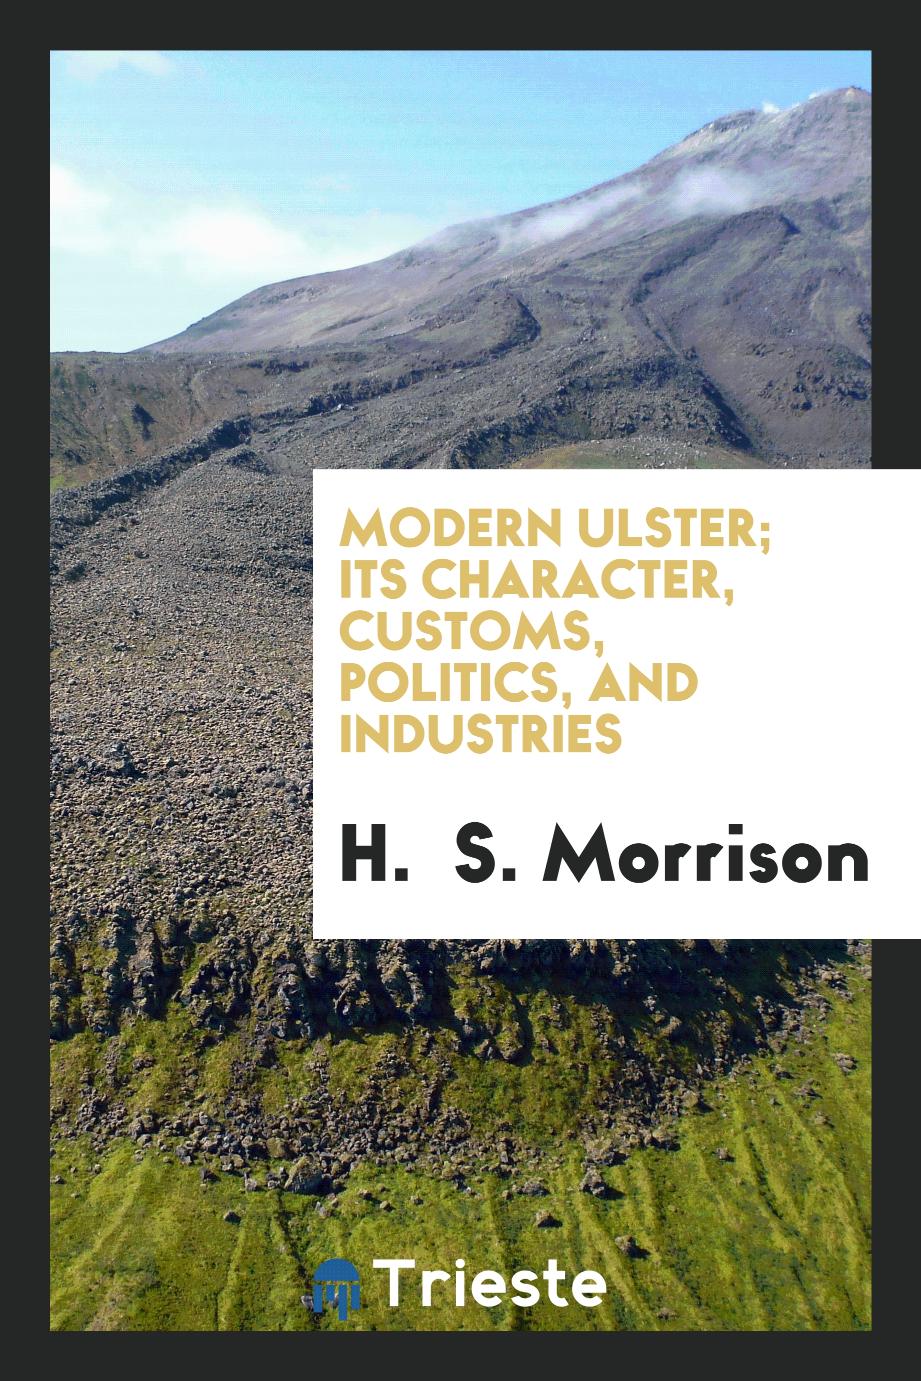 Modern Ulster; its character, customs, politics, and industries